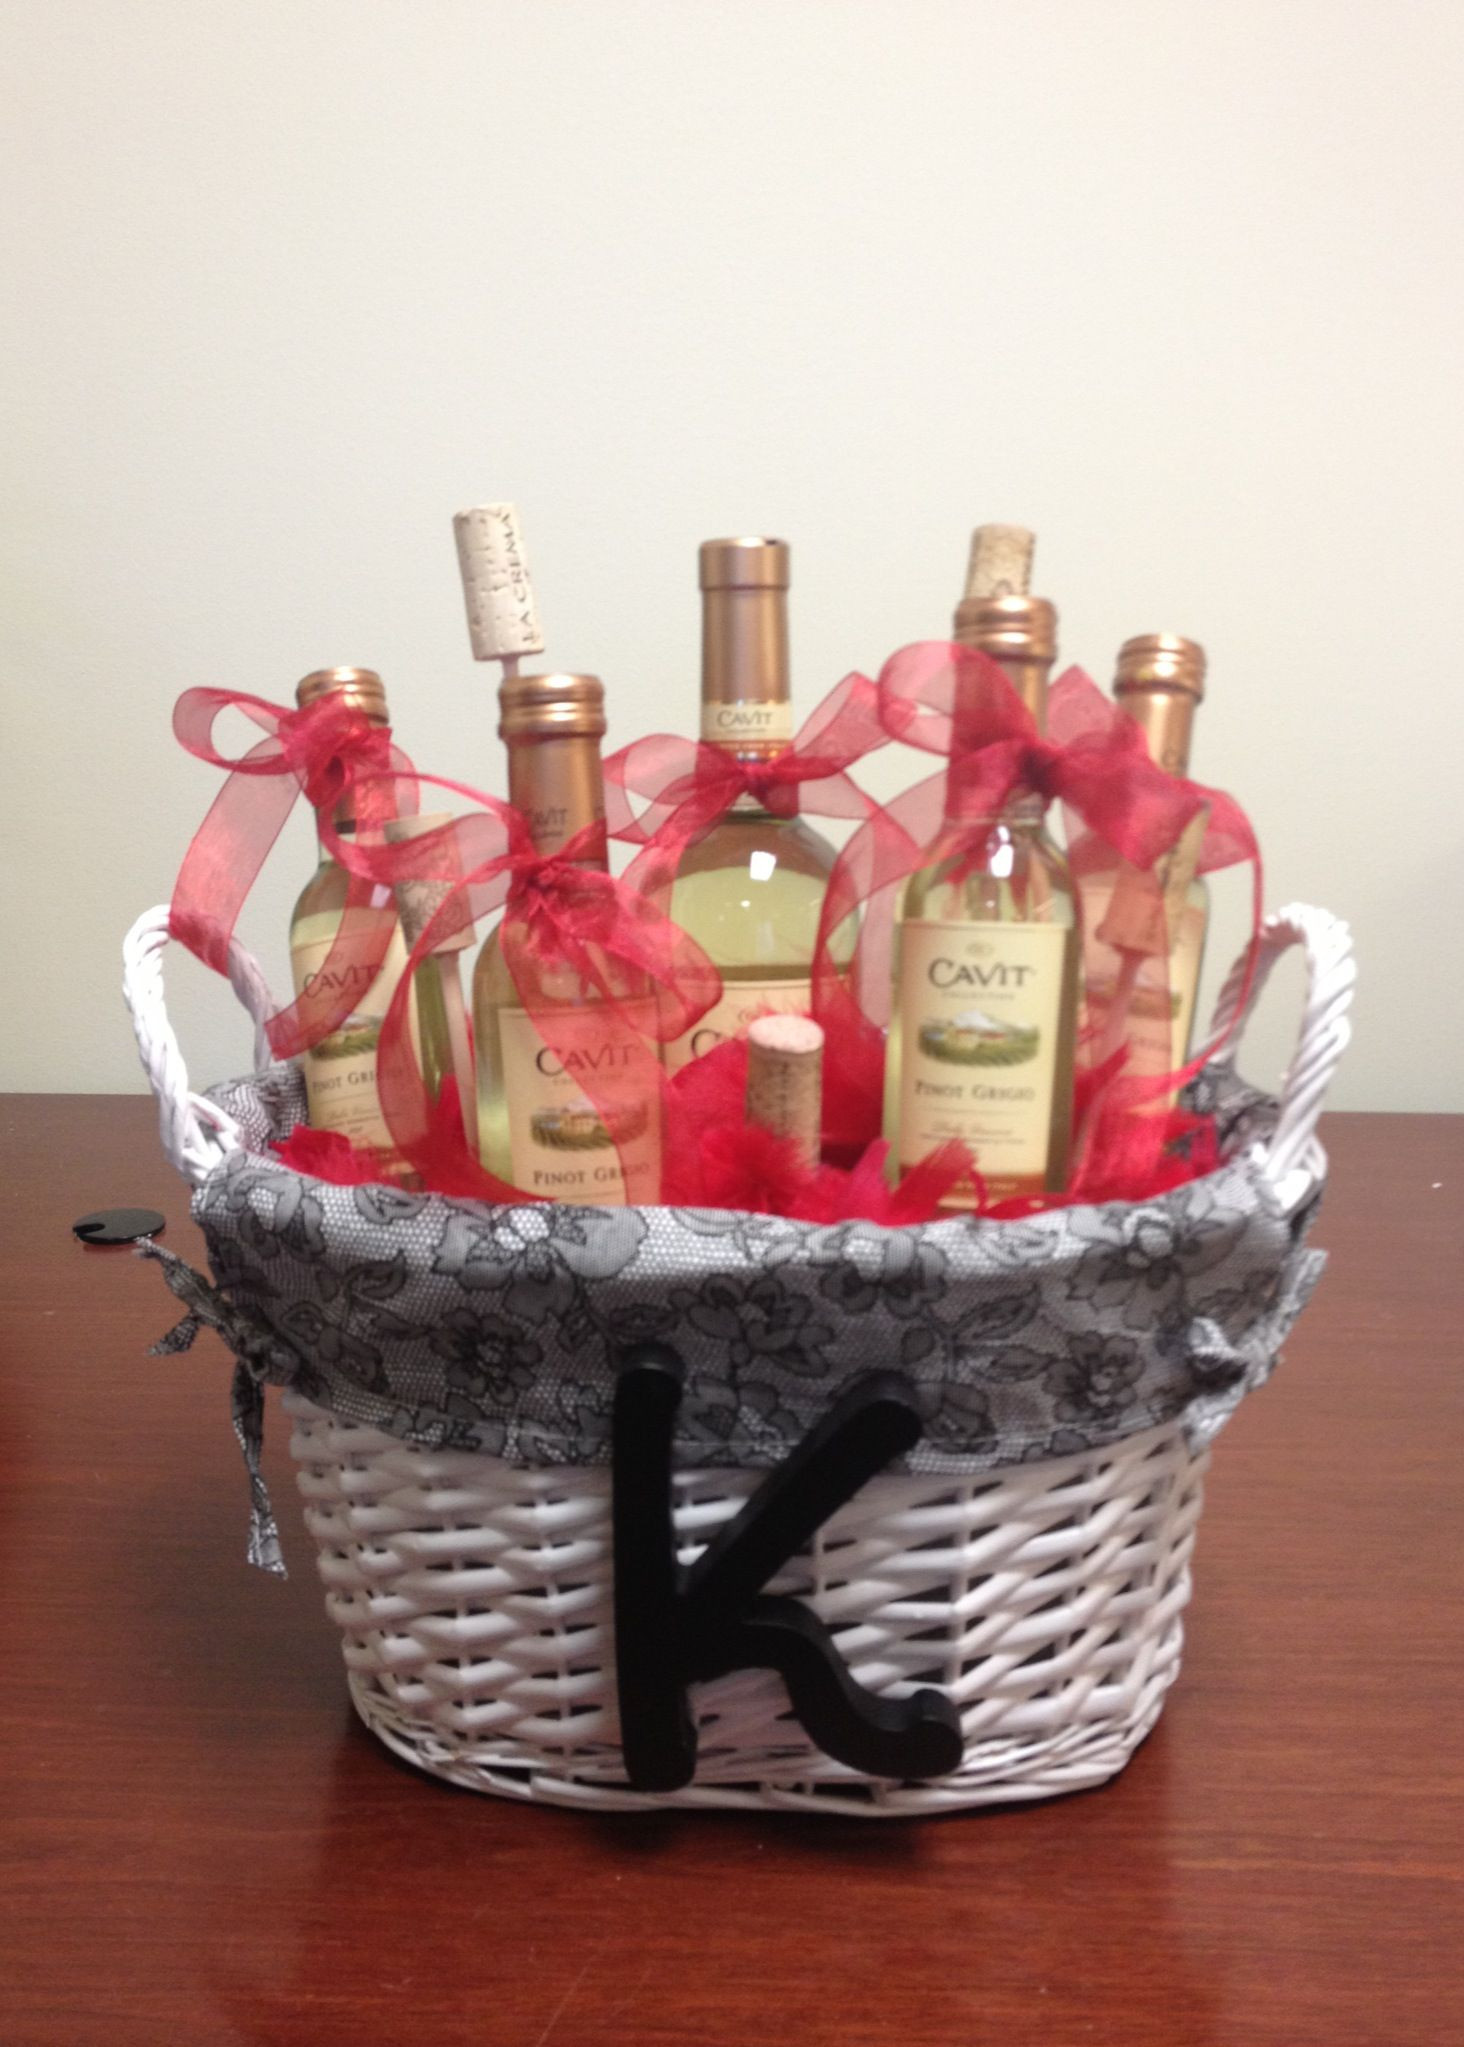 Homemade Valentine Gift Basket Ideas
 Pin by Samantha Hopkins on DIY Projects